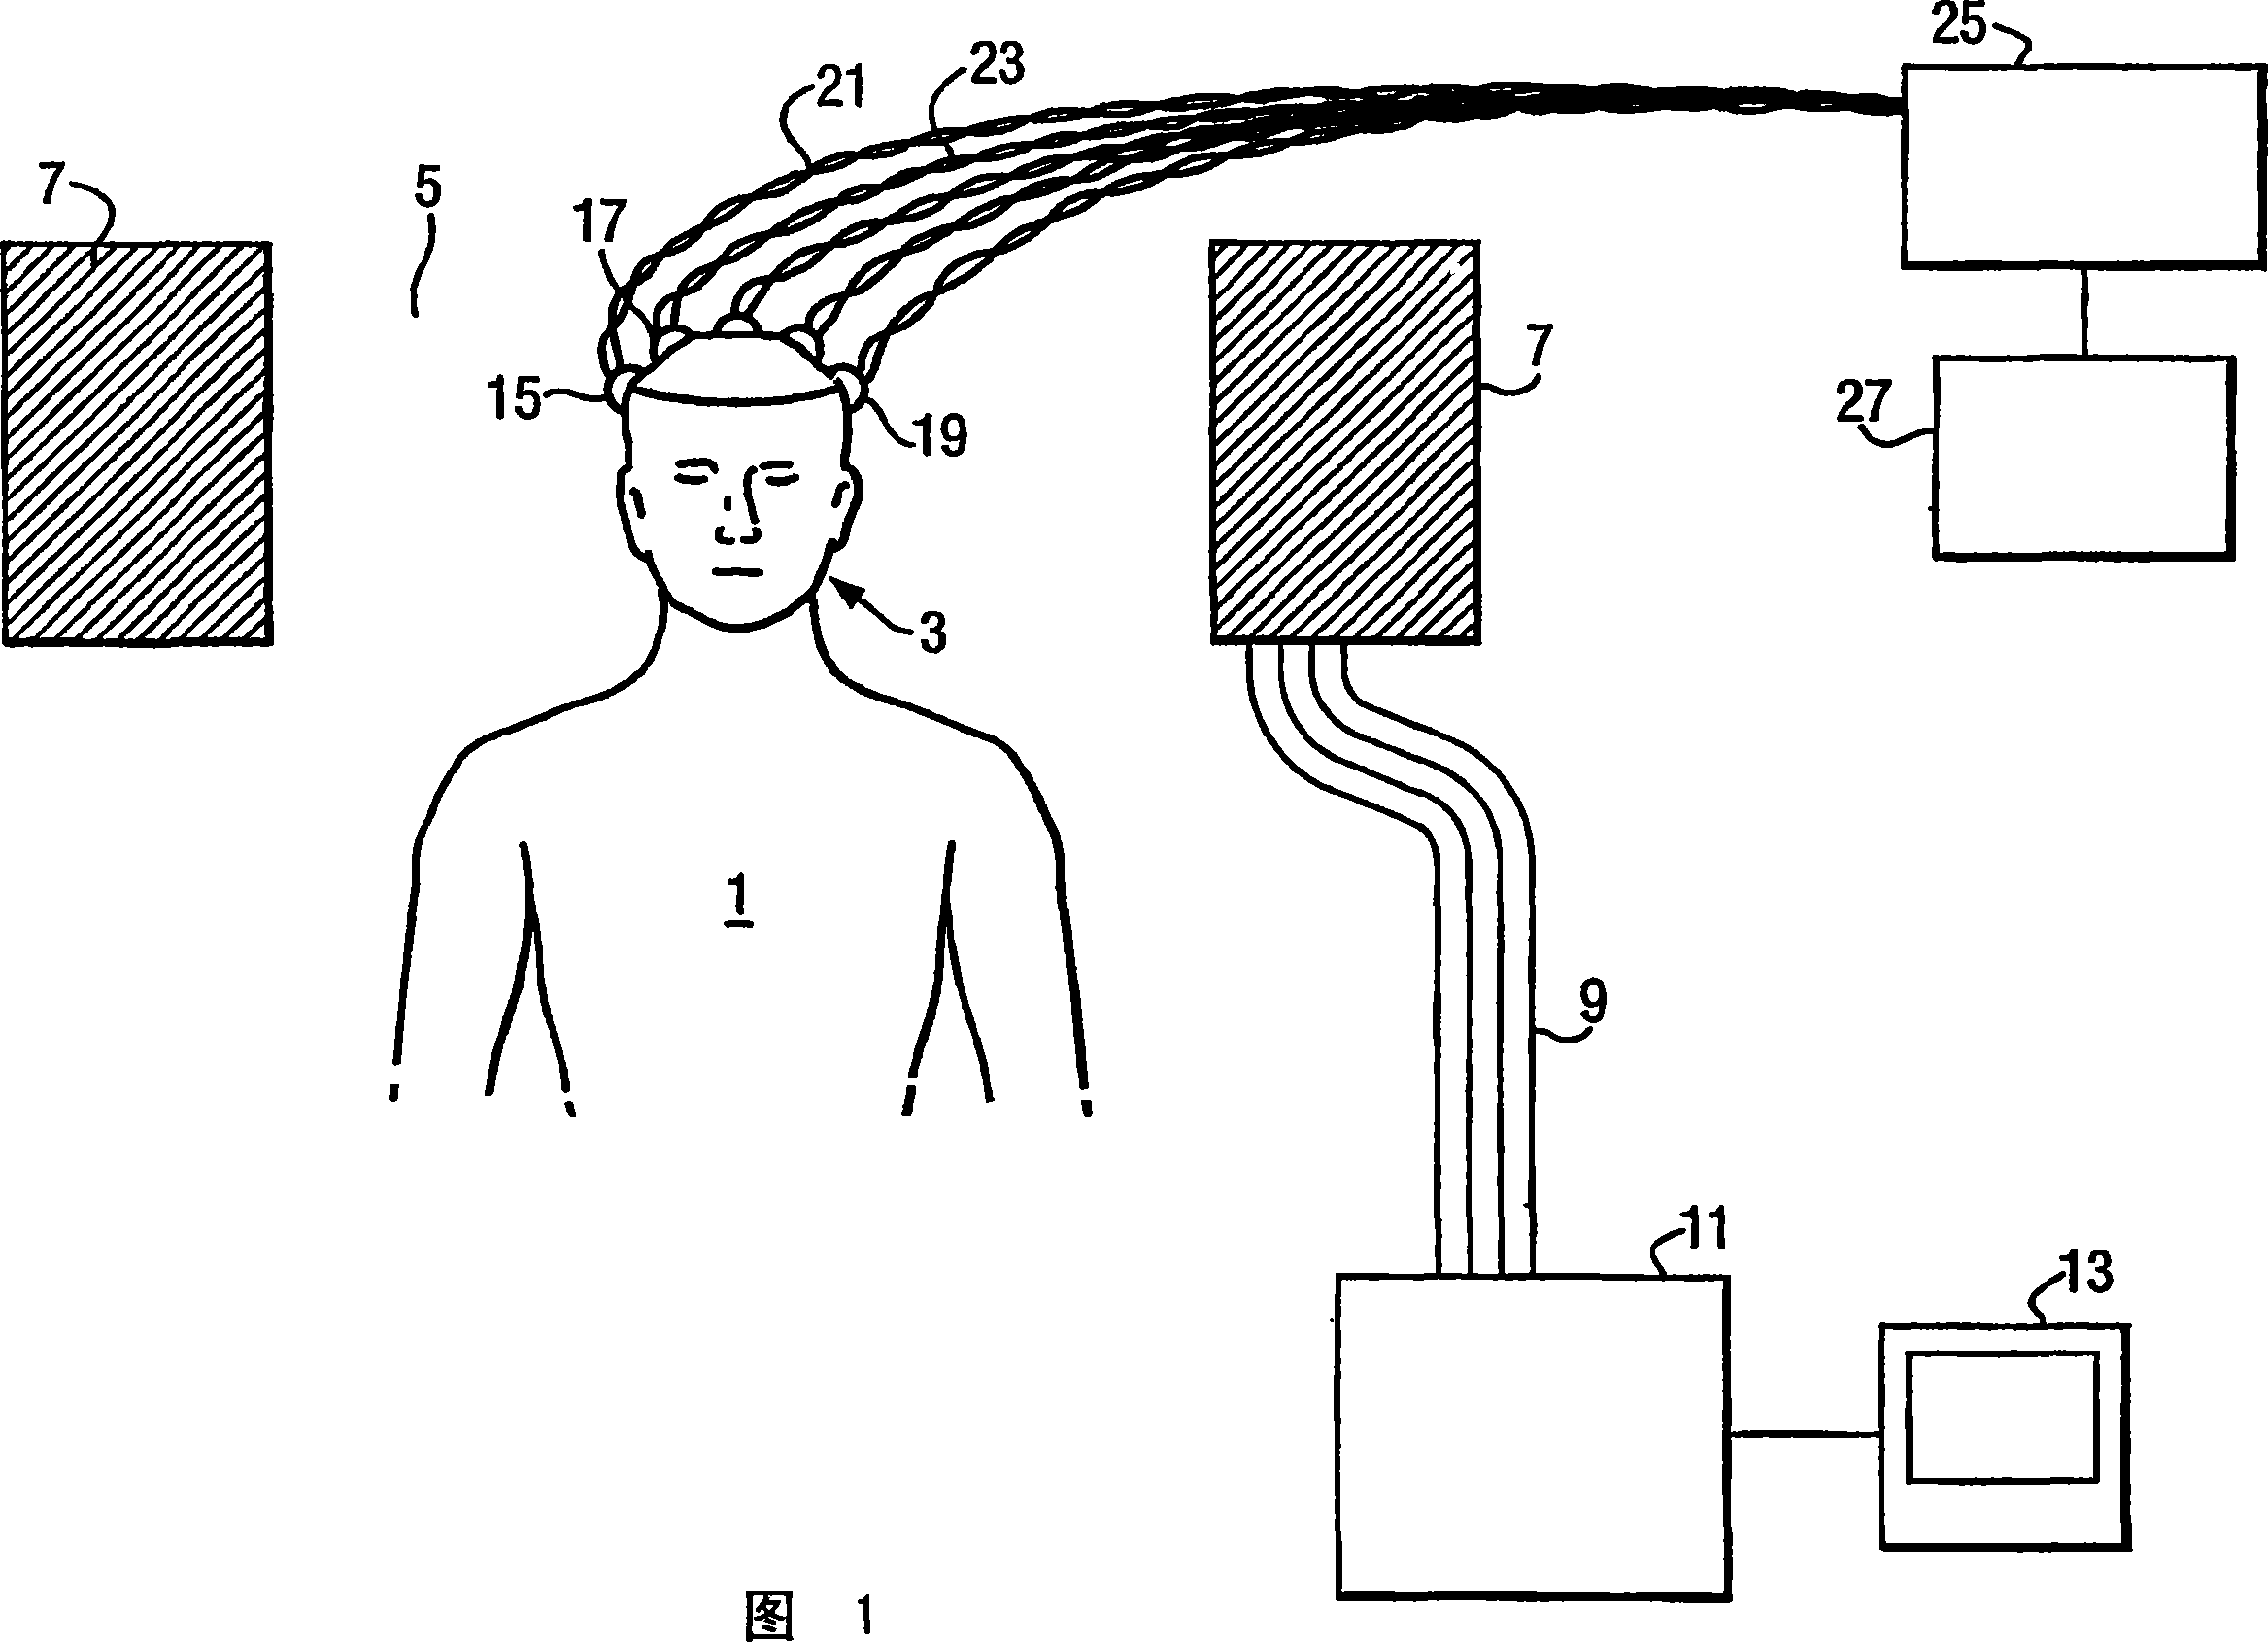 Apparatus and method for reducing interference